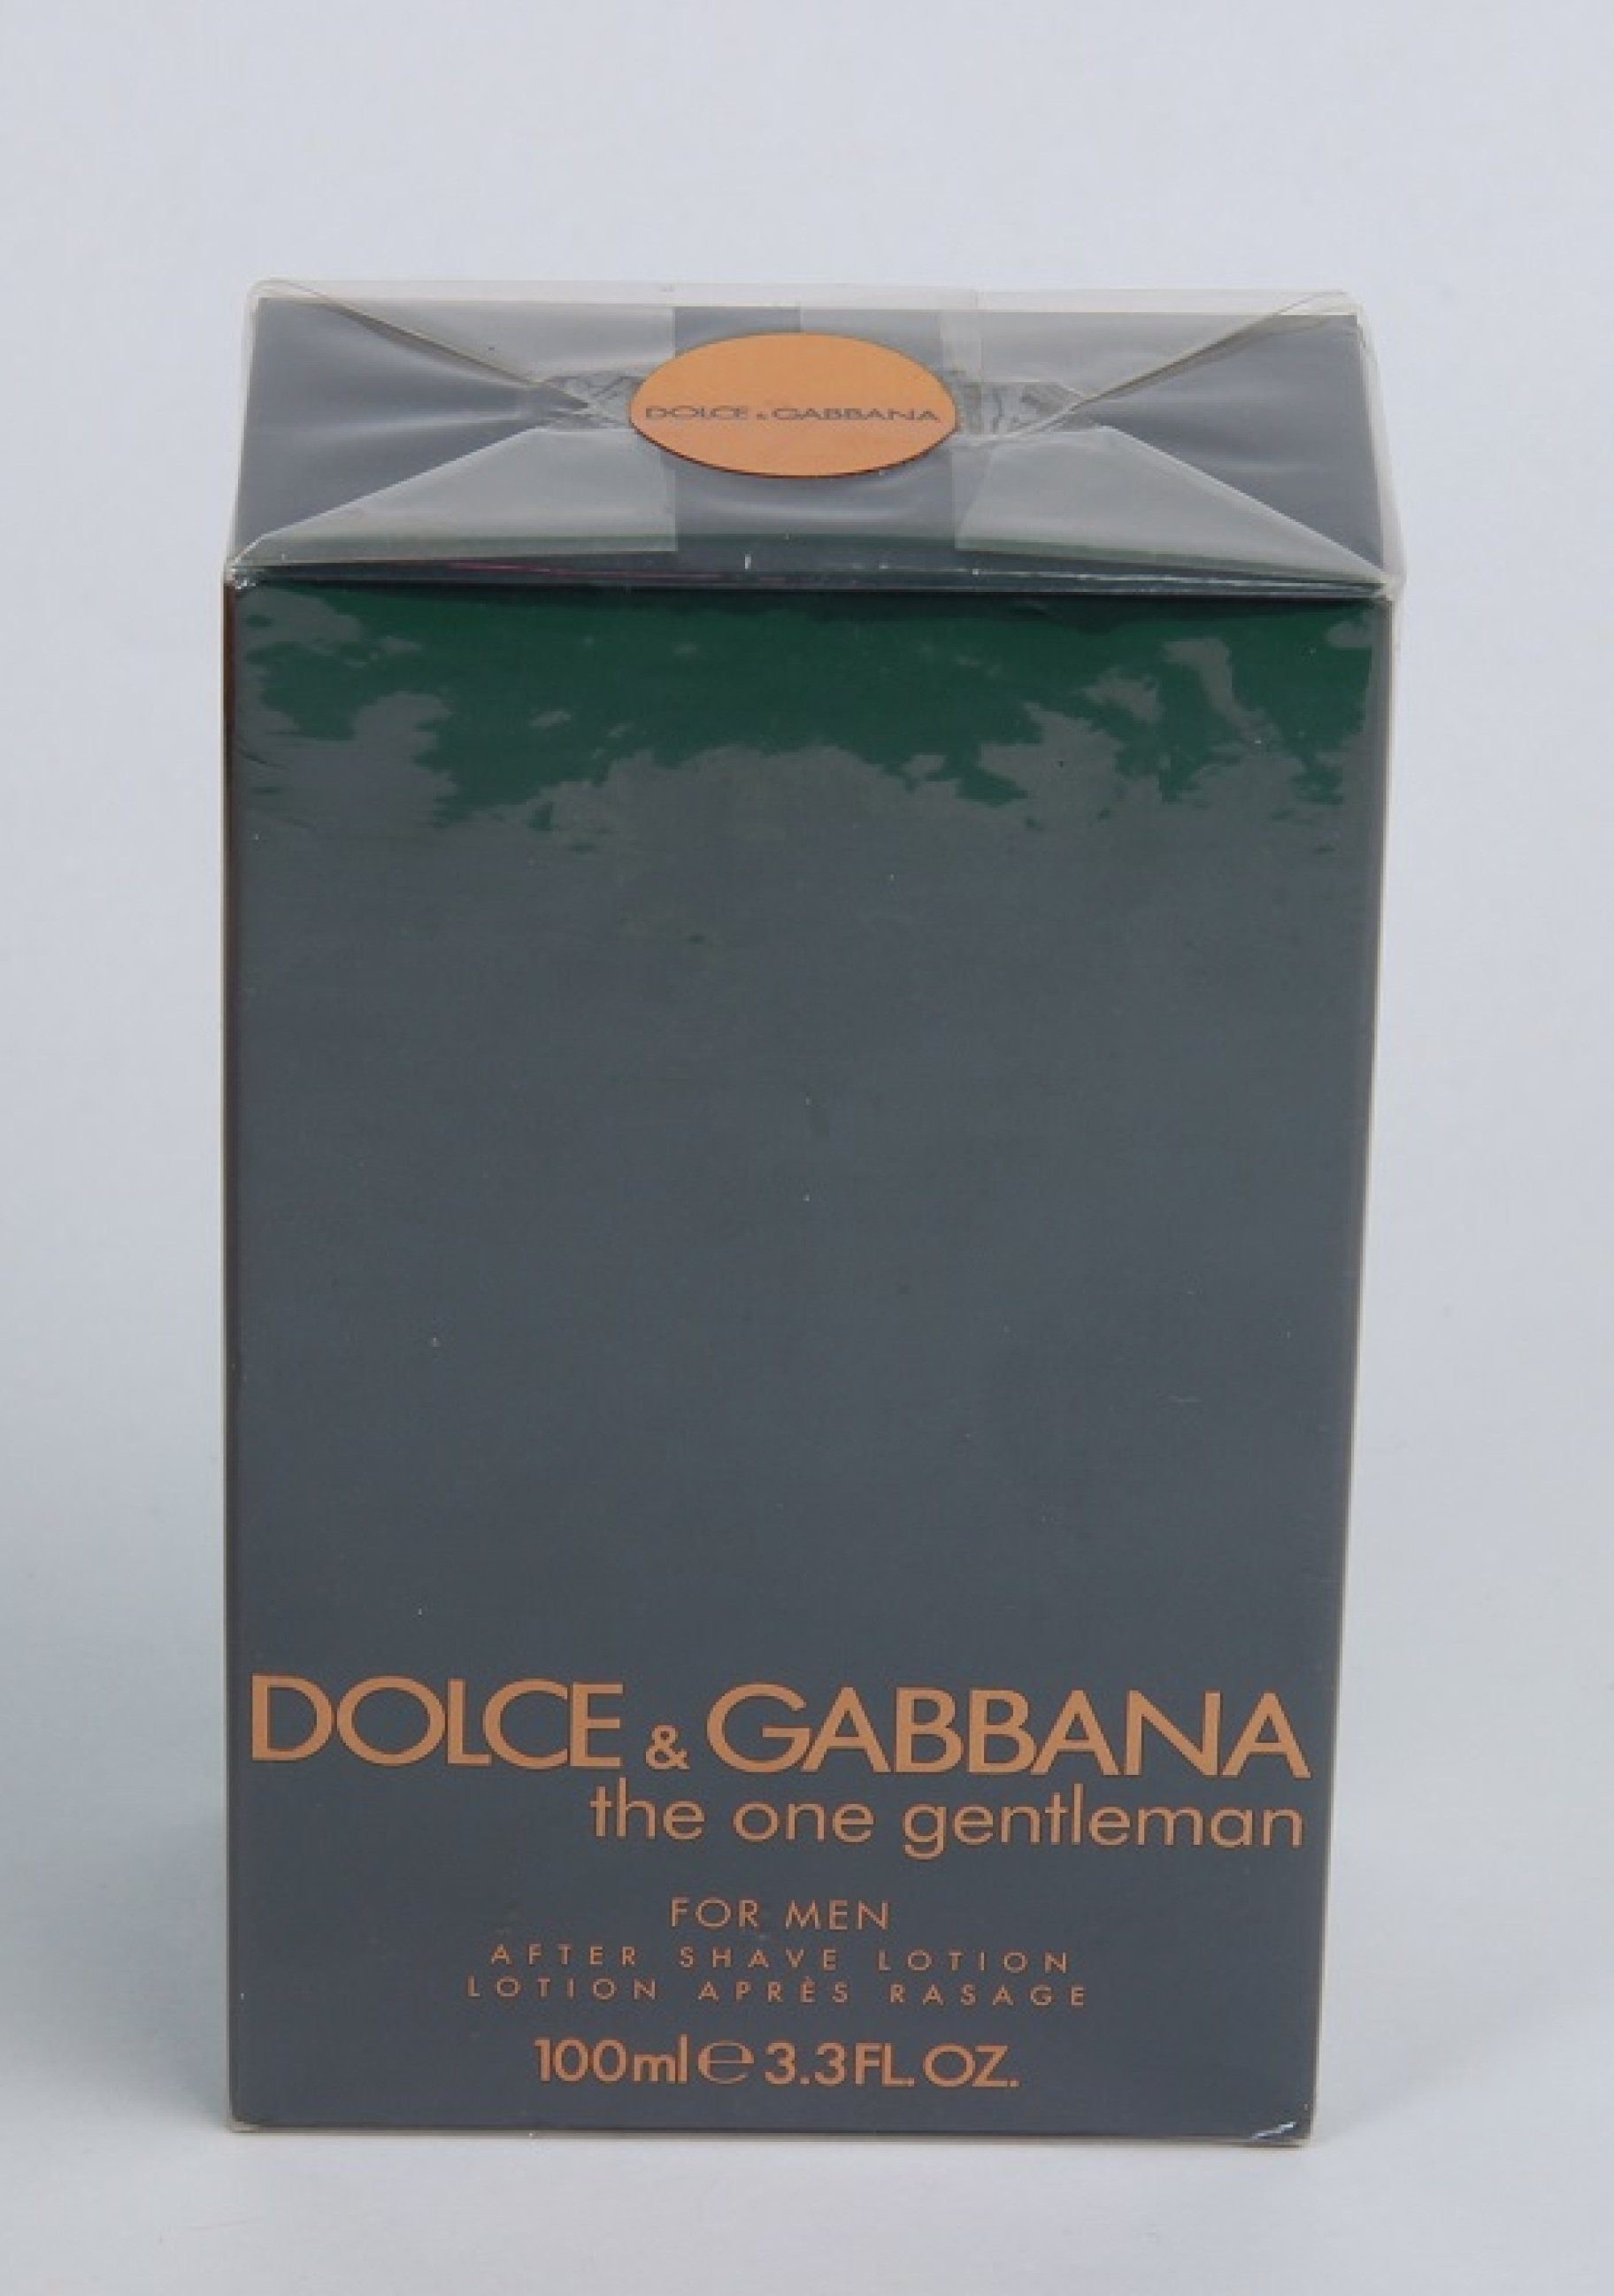 DOLCE & GABBANA After Shave Lotion Dolce & Gabbana The One Gentleman ...